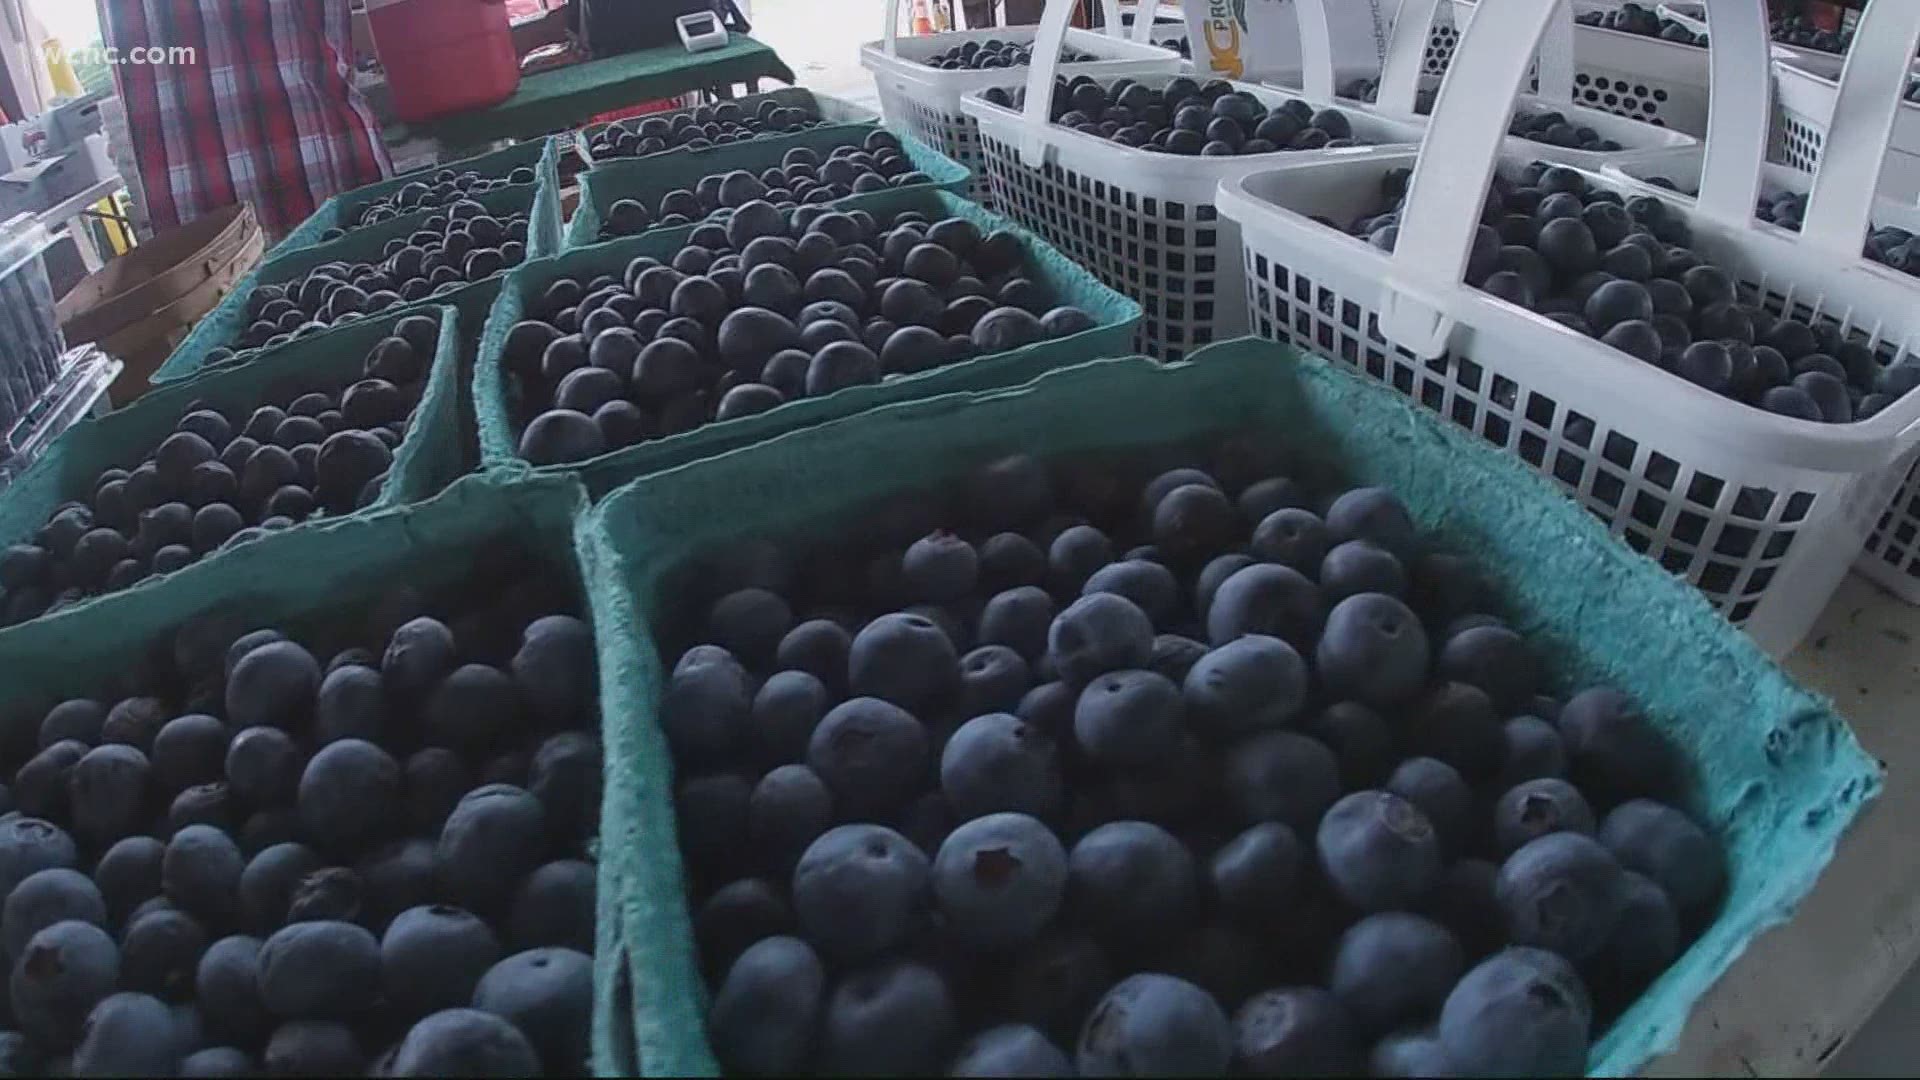 North Carolina produces 40 to 50 million pounds of blueberries each year. Half of that comes from Bladen County, where severe weather dealt a blow to farmers.